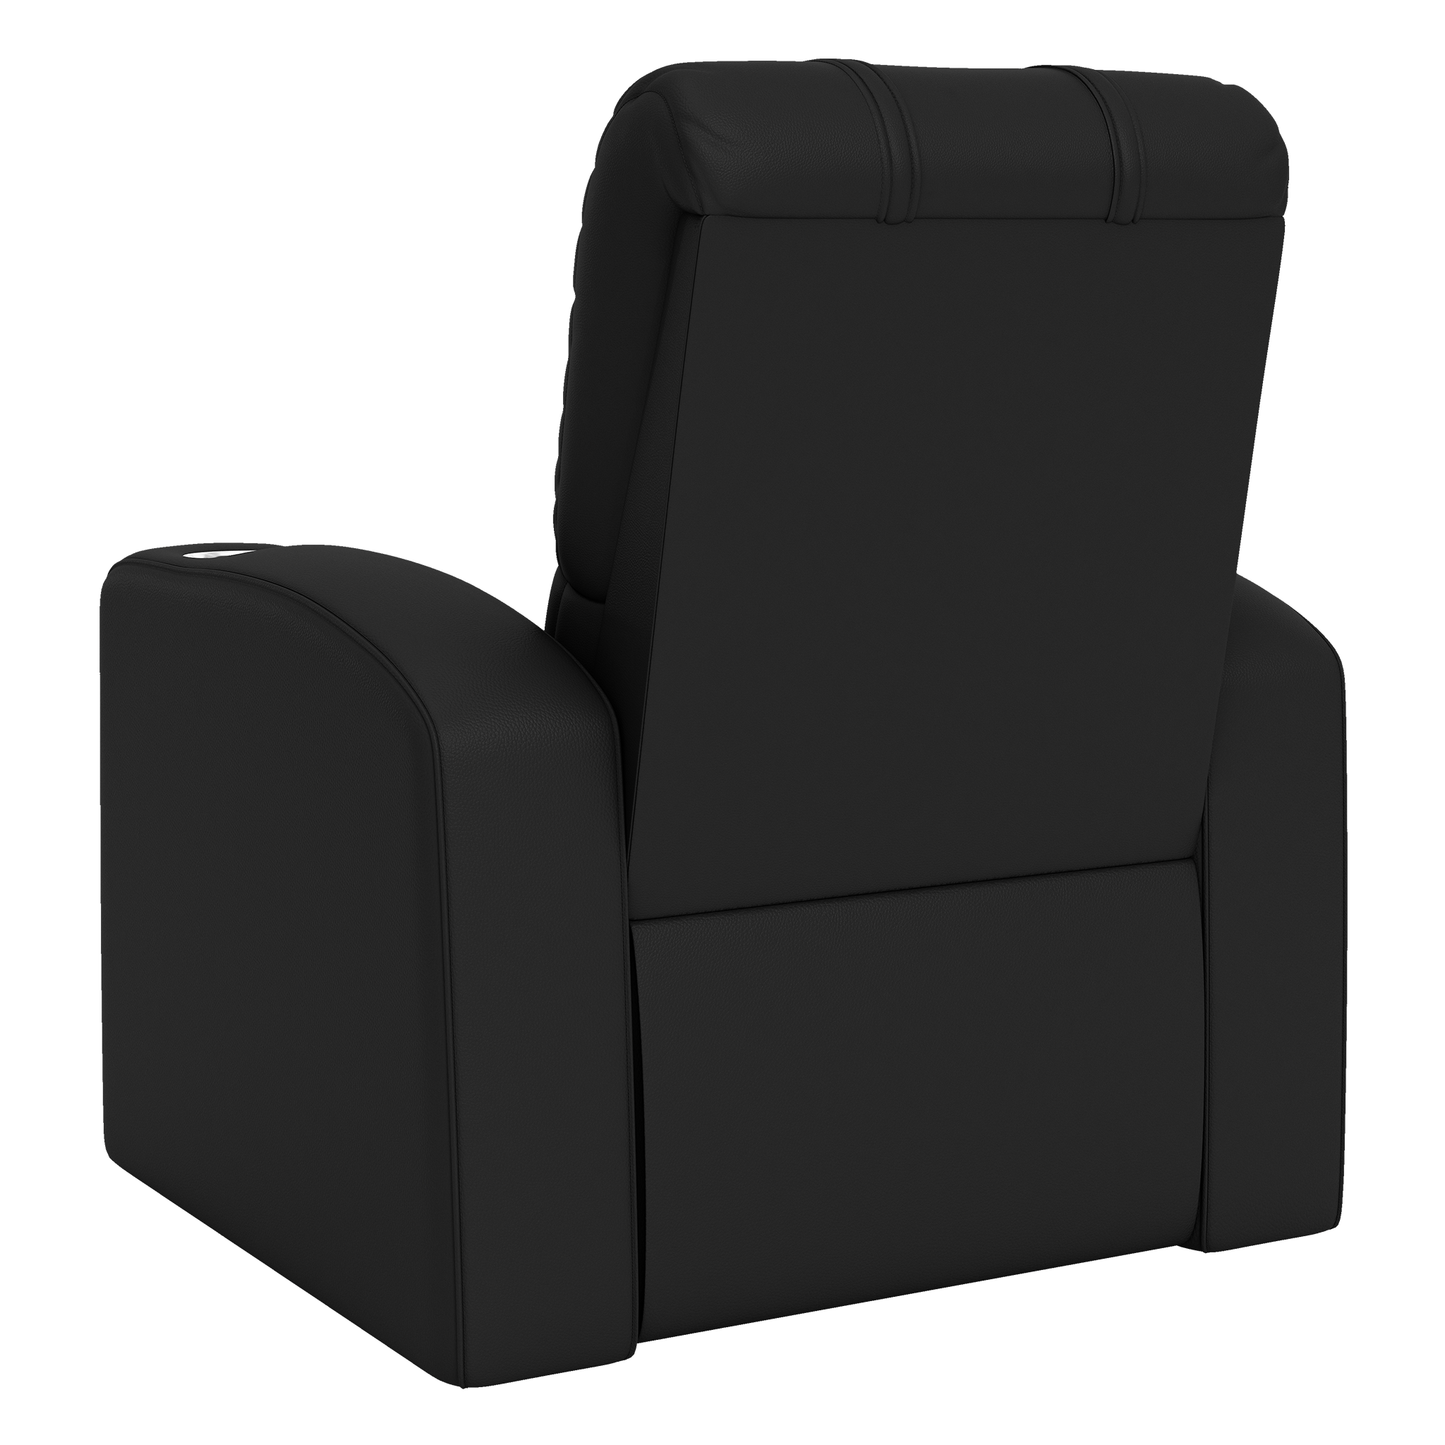 Relax Home Theater Recliner with  Detroit Lions Primary Logo